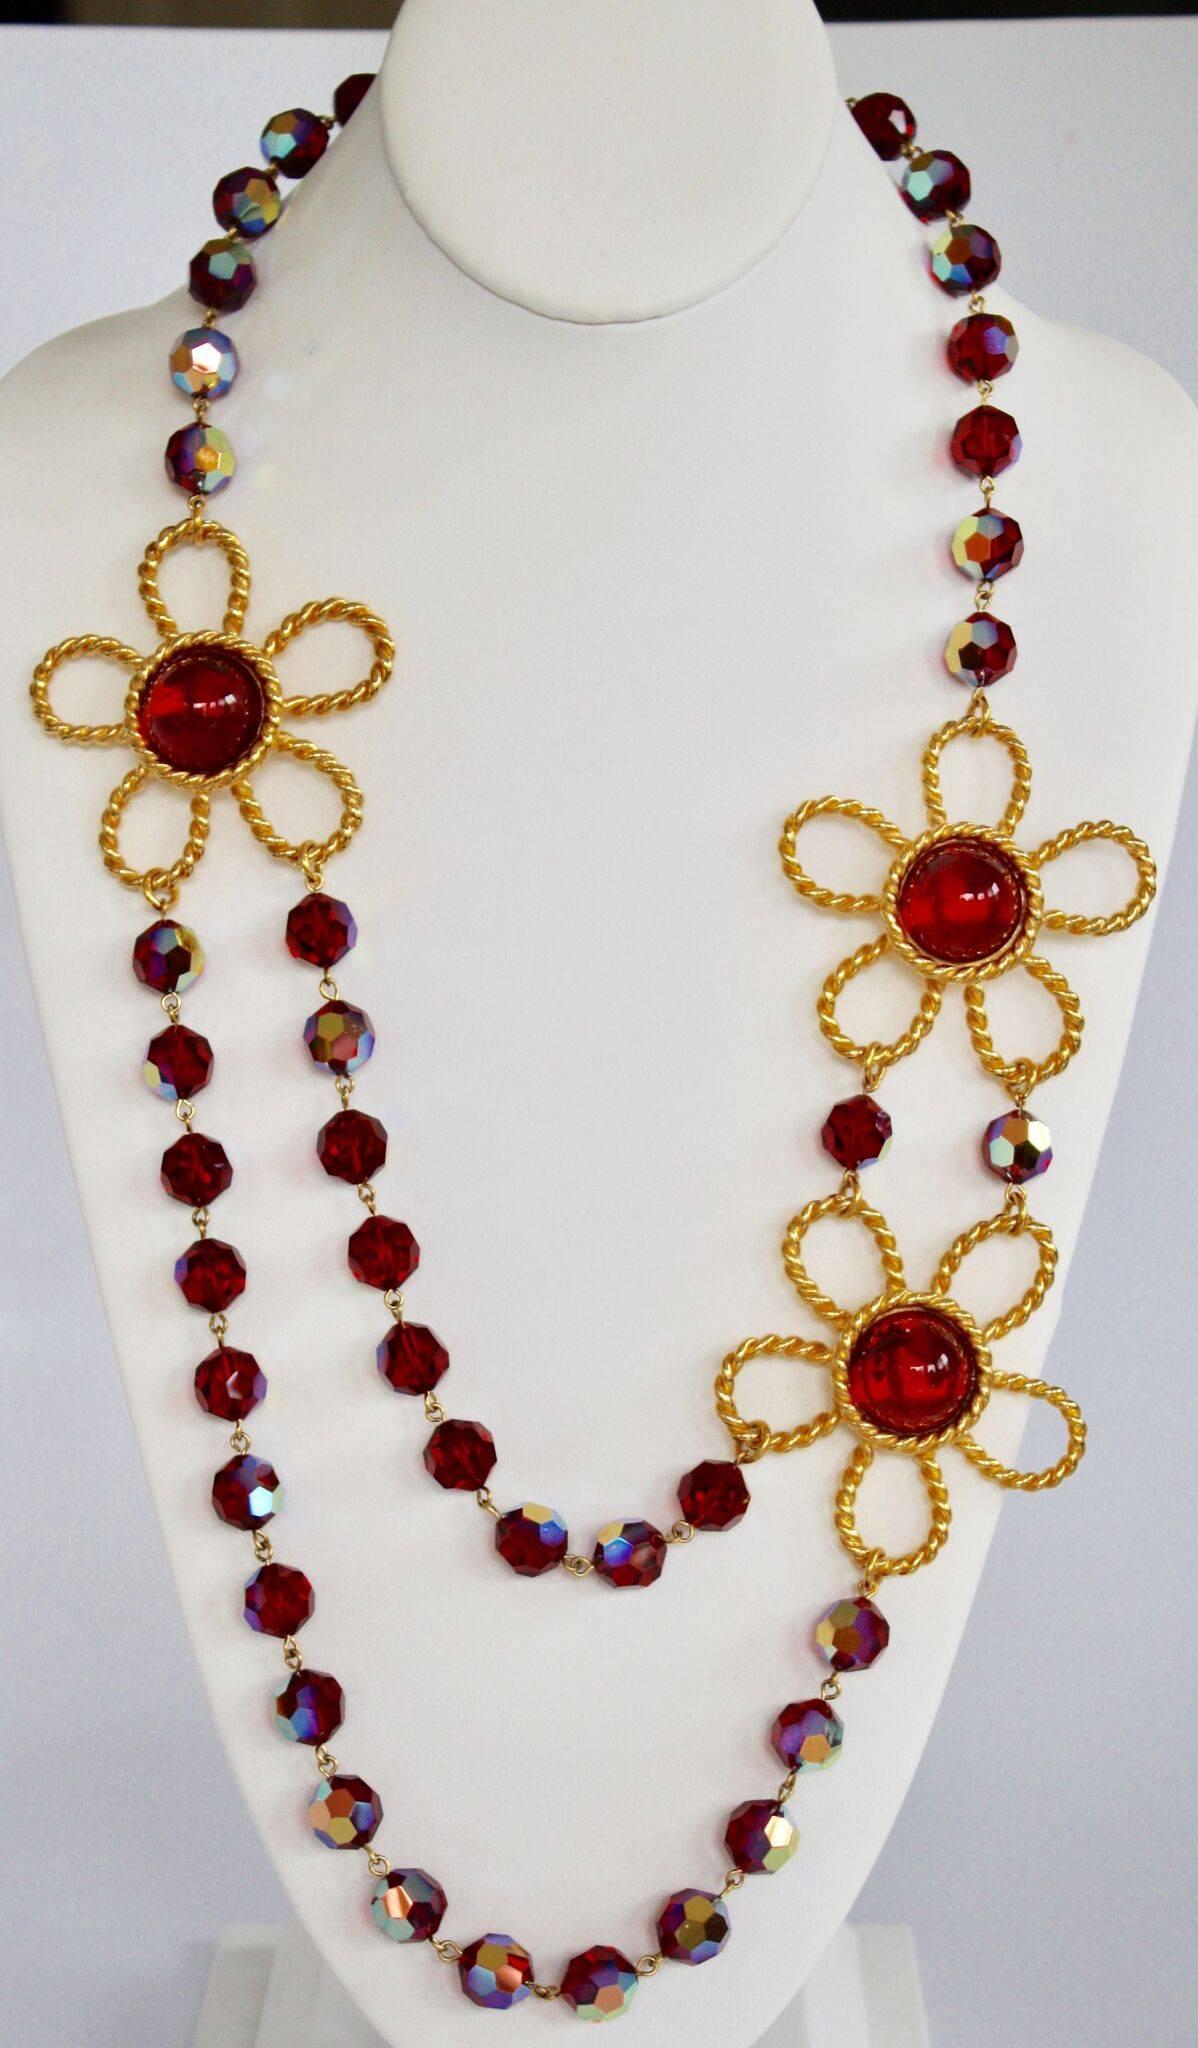 Red handmade glass bead and gilde4d brass flower necklace from Francoise Montague. Handmade glass pearls